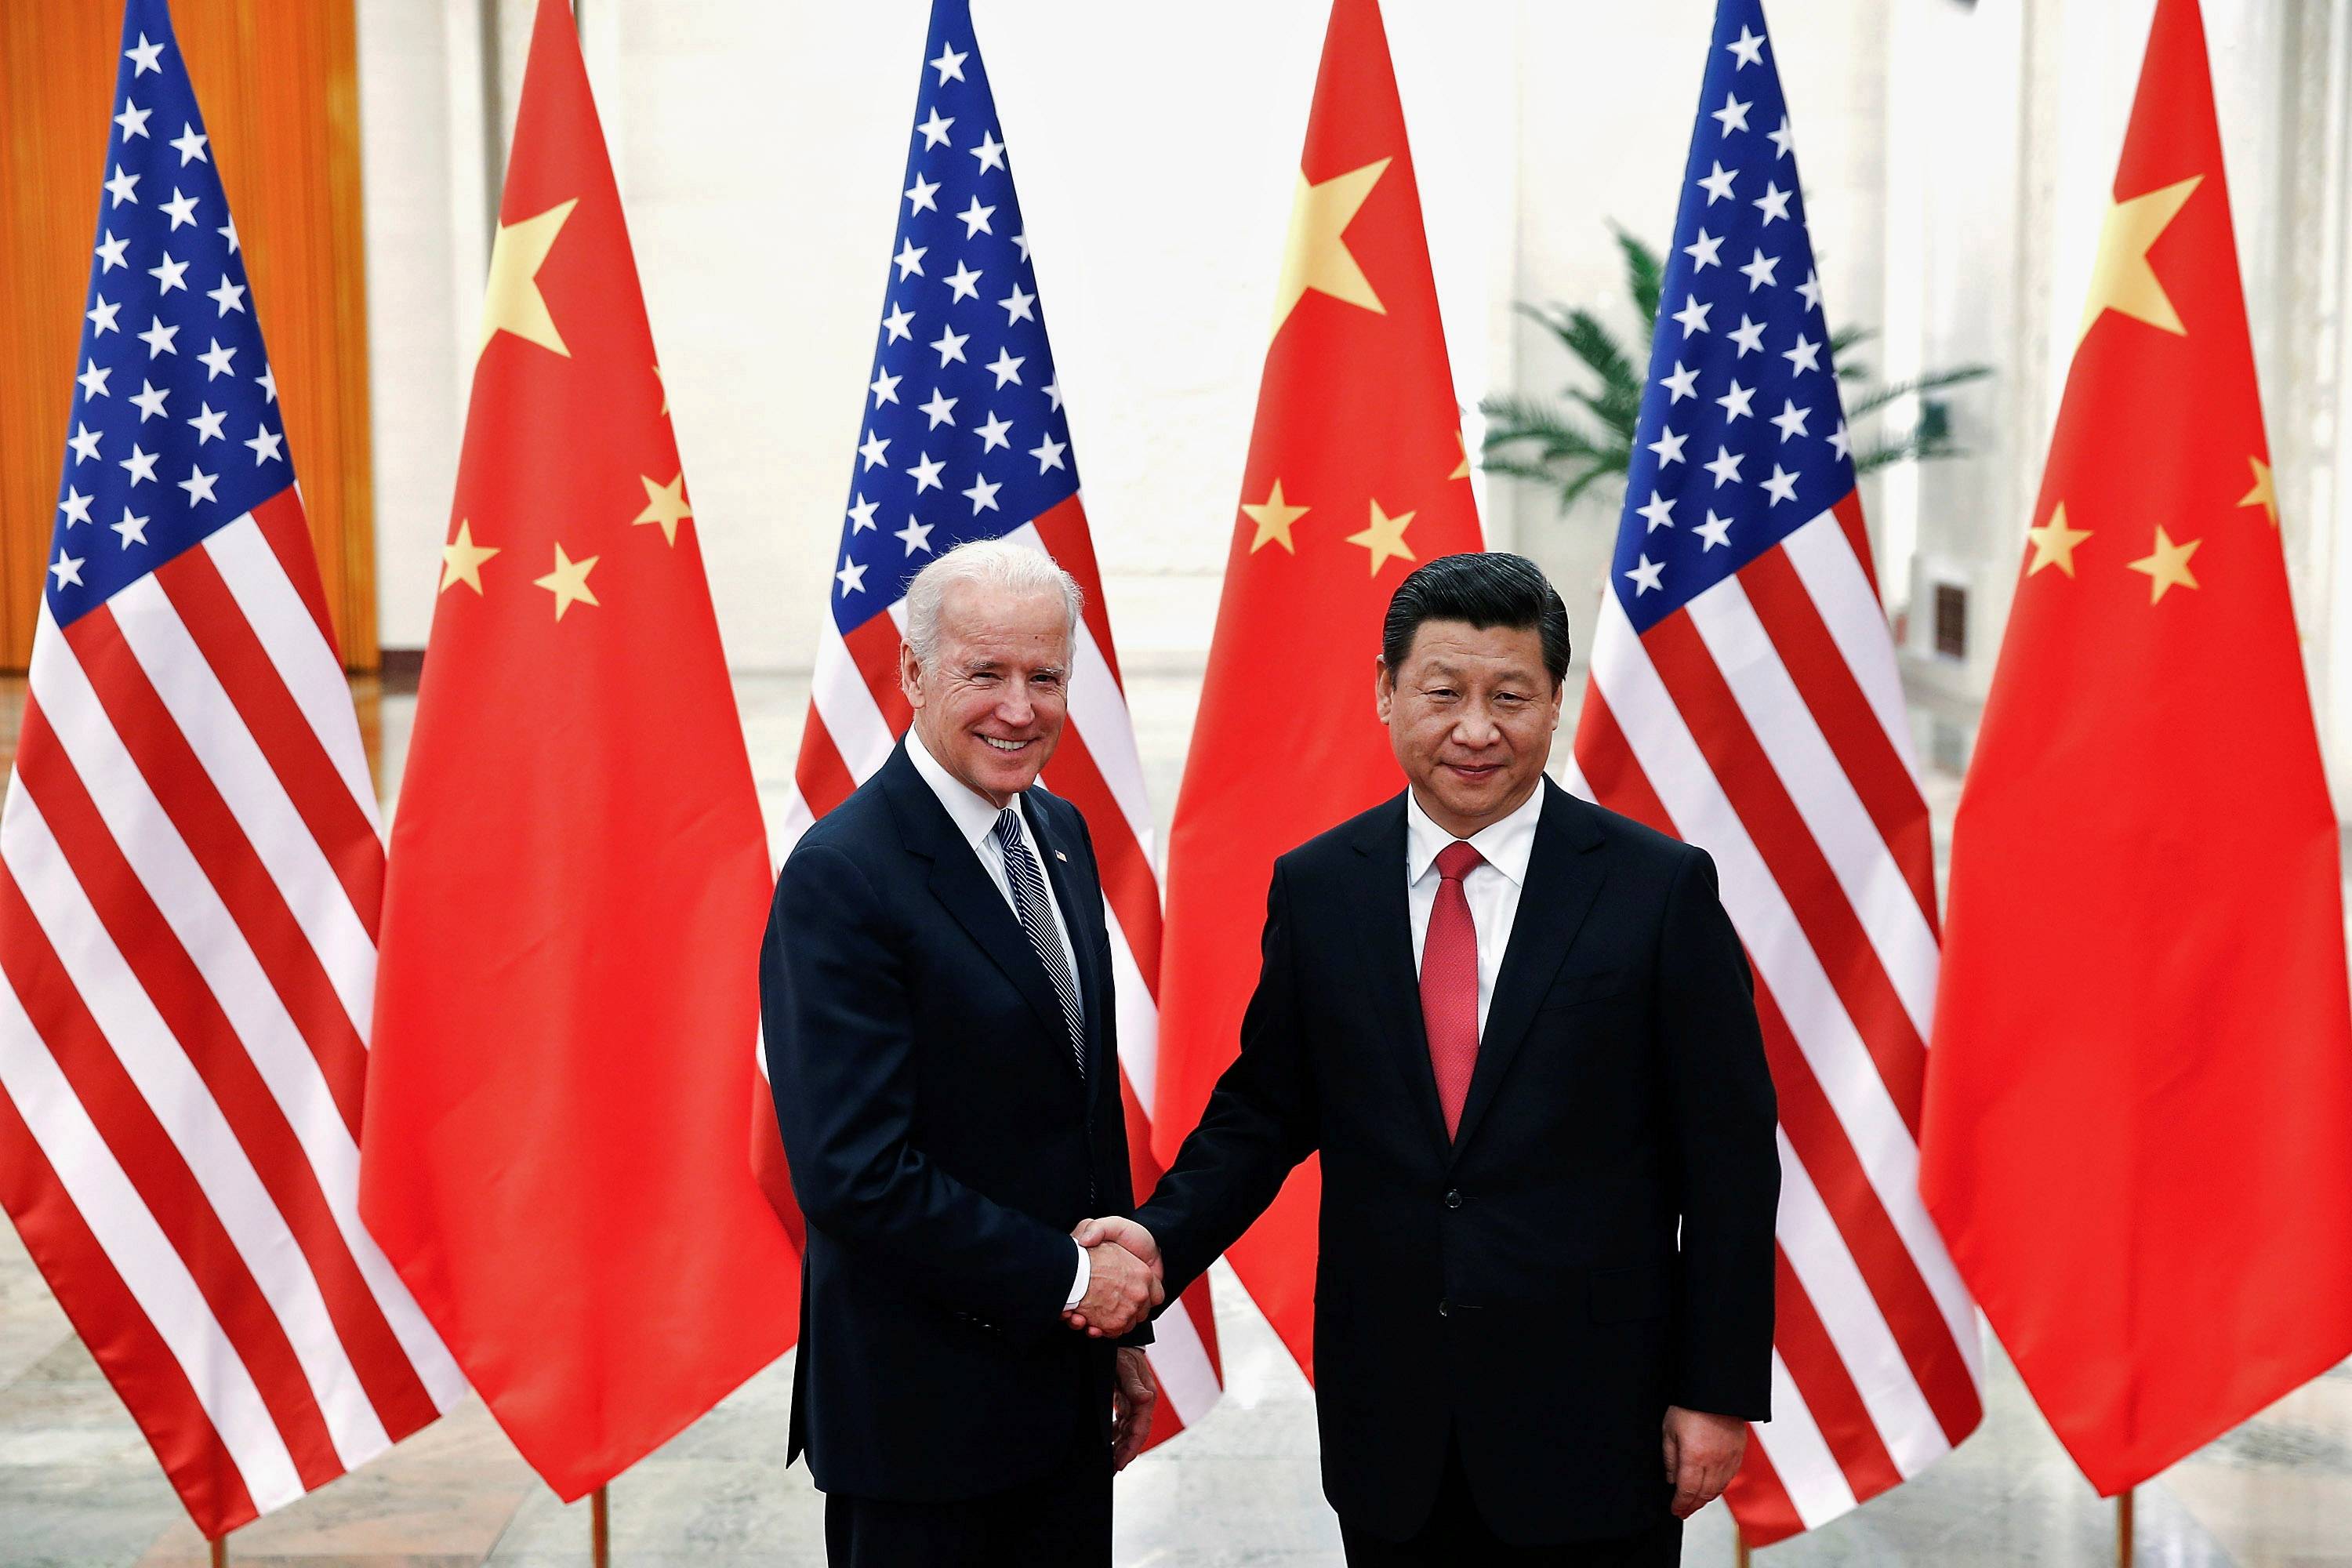 Chinese President Xi Jinping shakes hands with then-U.S. Vice President Joe Biden inside the Great Hall of the People in Beijing in December 2013. | POOL / VIA REUTERS